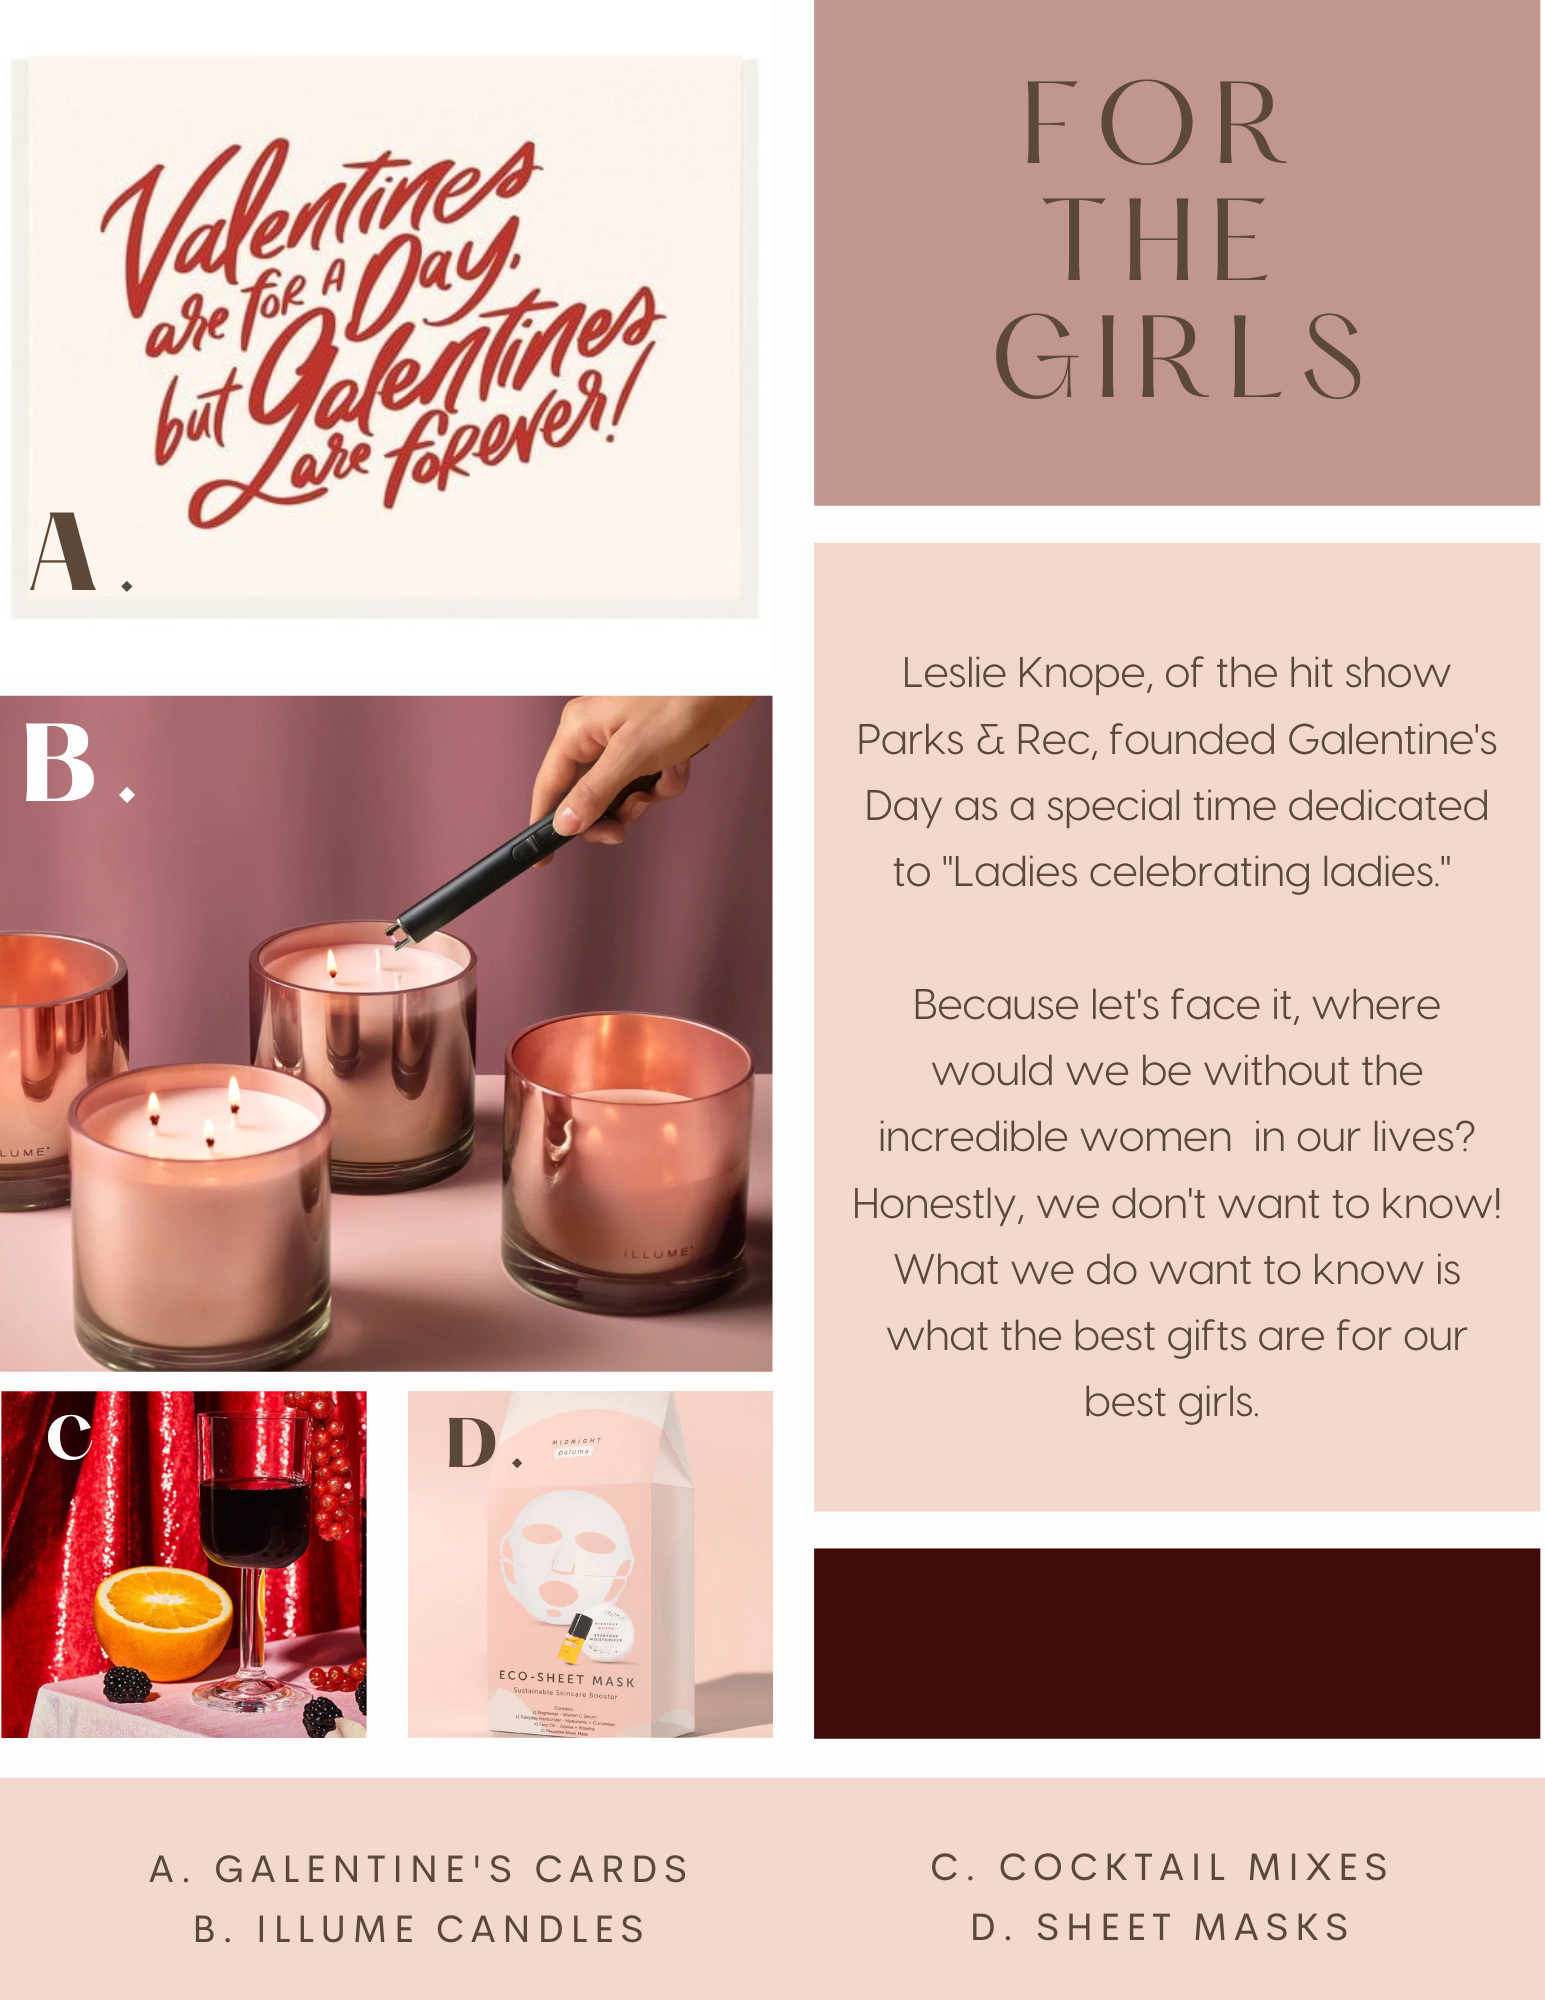 A Galentine's card and gift guide. 